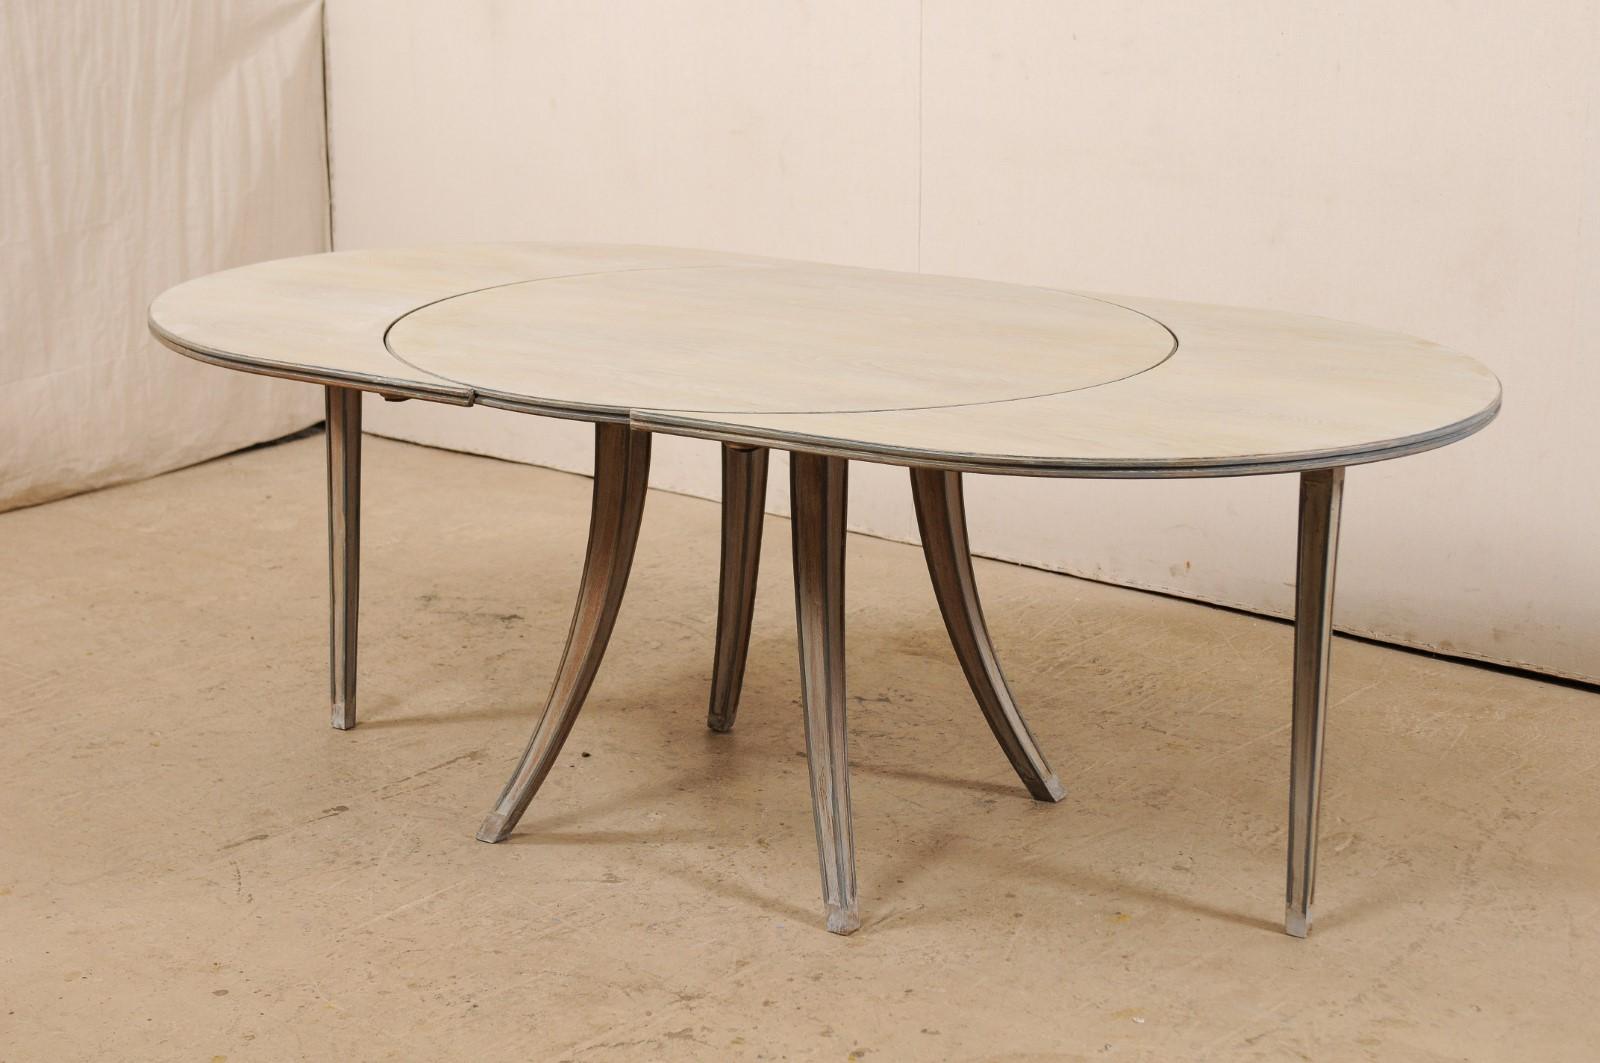 Mid-Century Modern French Mid-century Modern Dining or Center Table, Transitions from Oval to Round